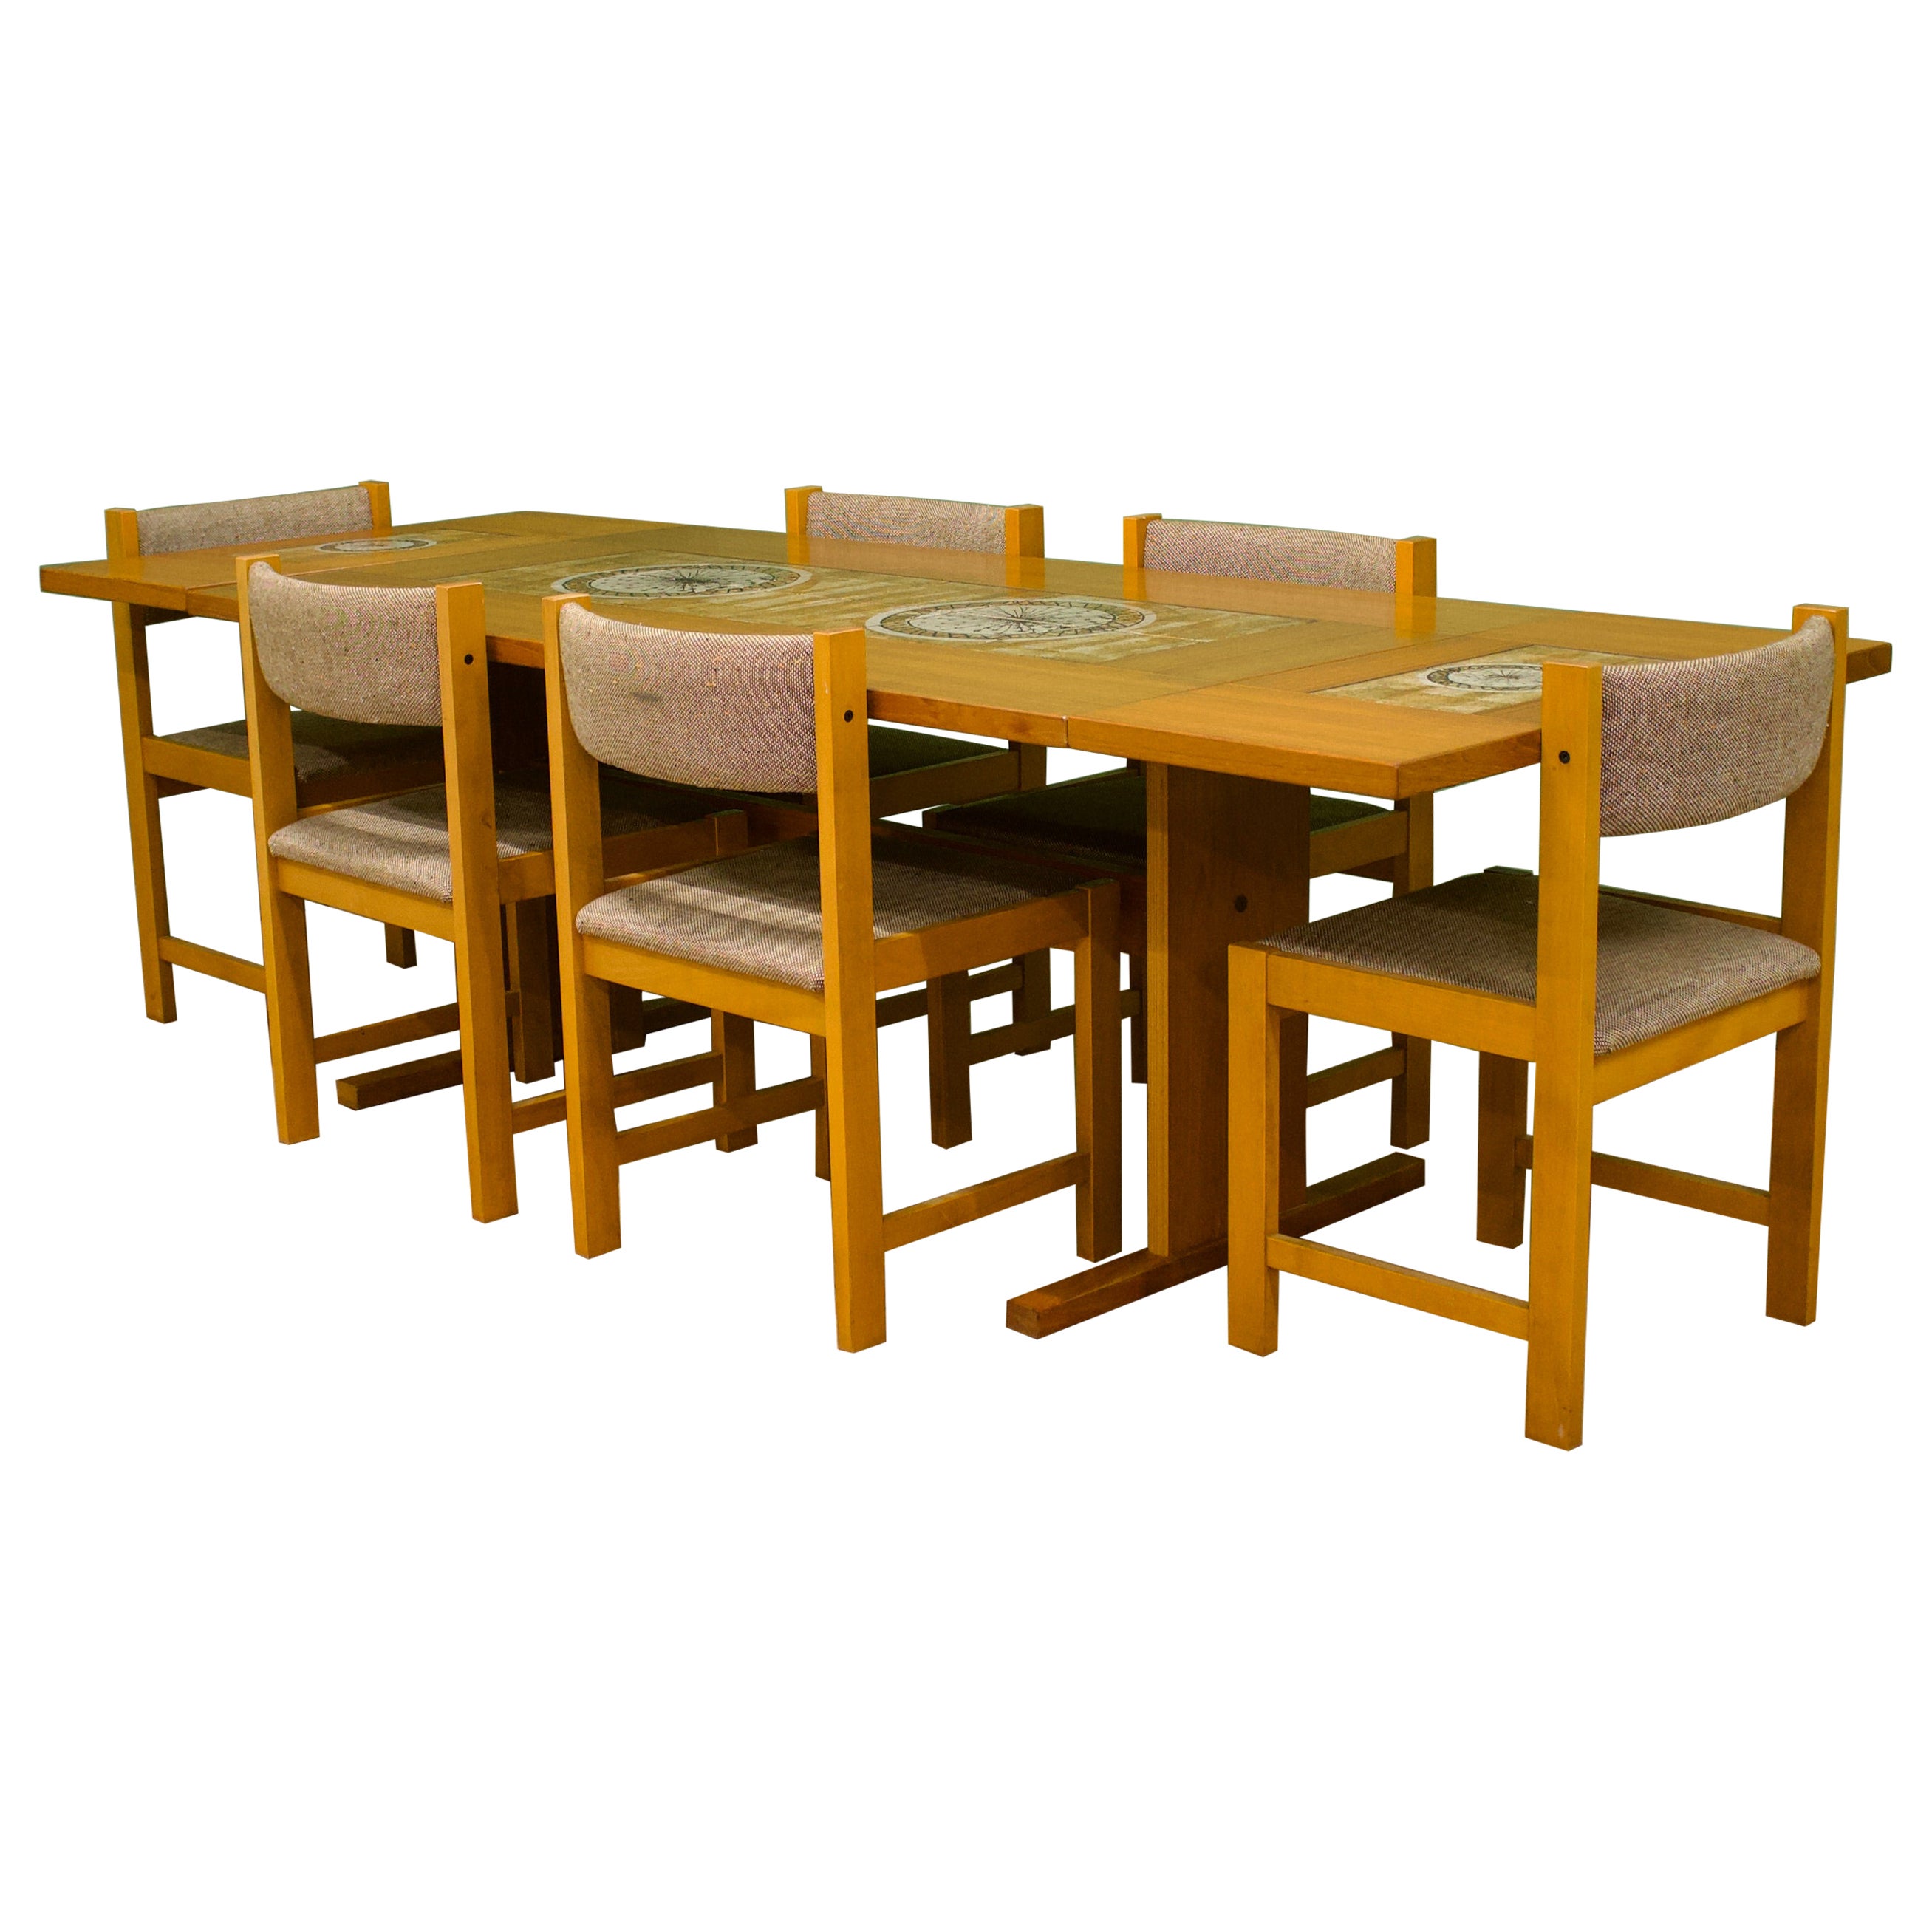 Midcentury Danish Teak Tiled Extendable Dining Table and 6 Dining Chairs by Gan